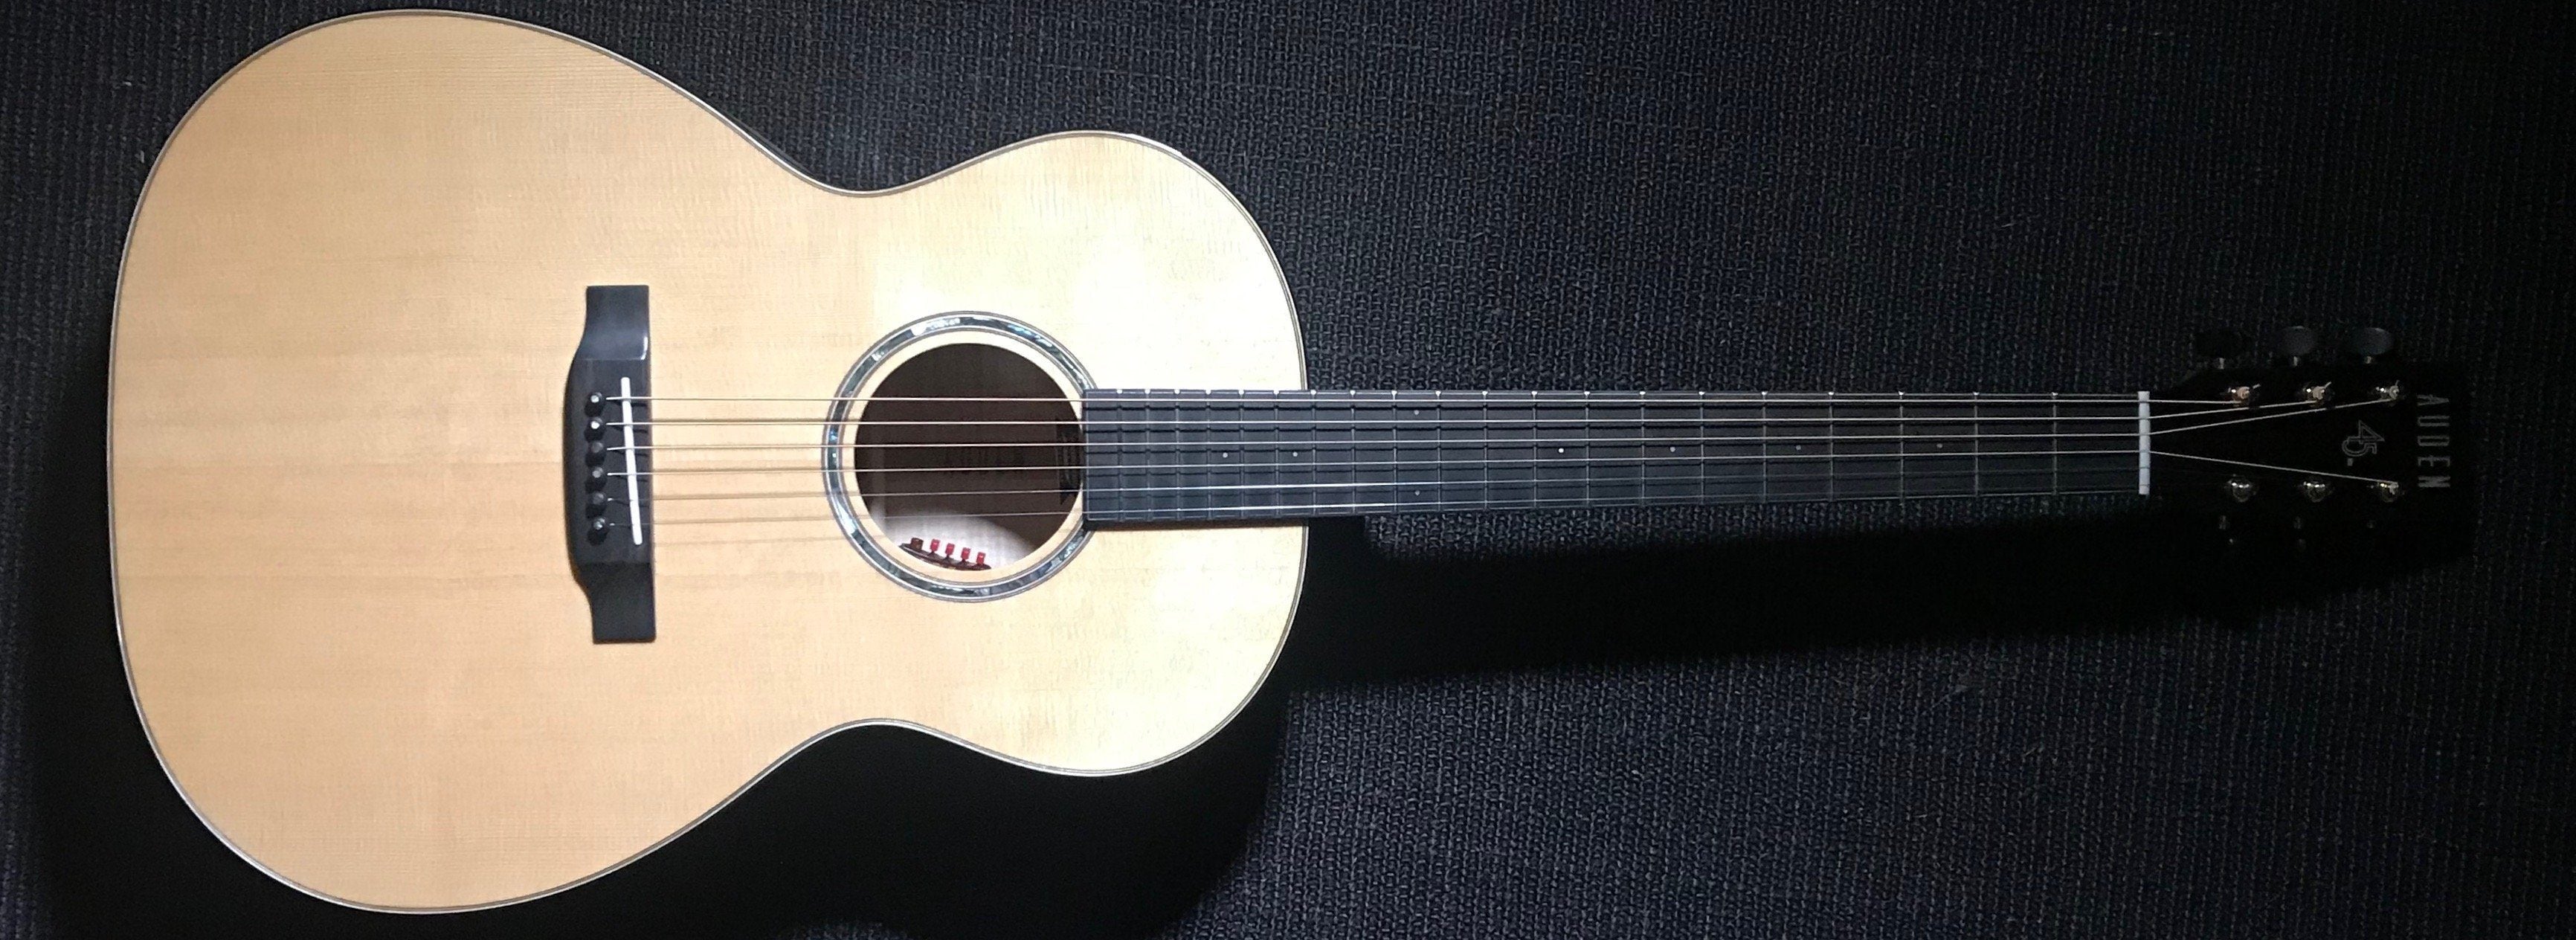 Auden Artist 45 Chester Maple Fullbody., Electro Acoustic Guitar for sale at Richards Guitars.